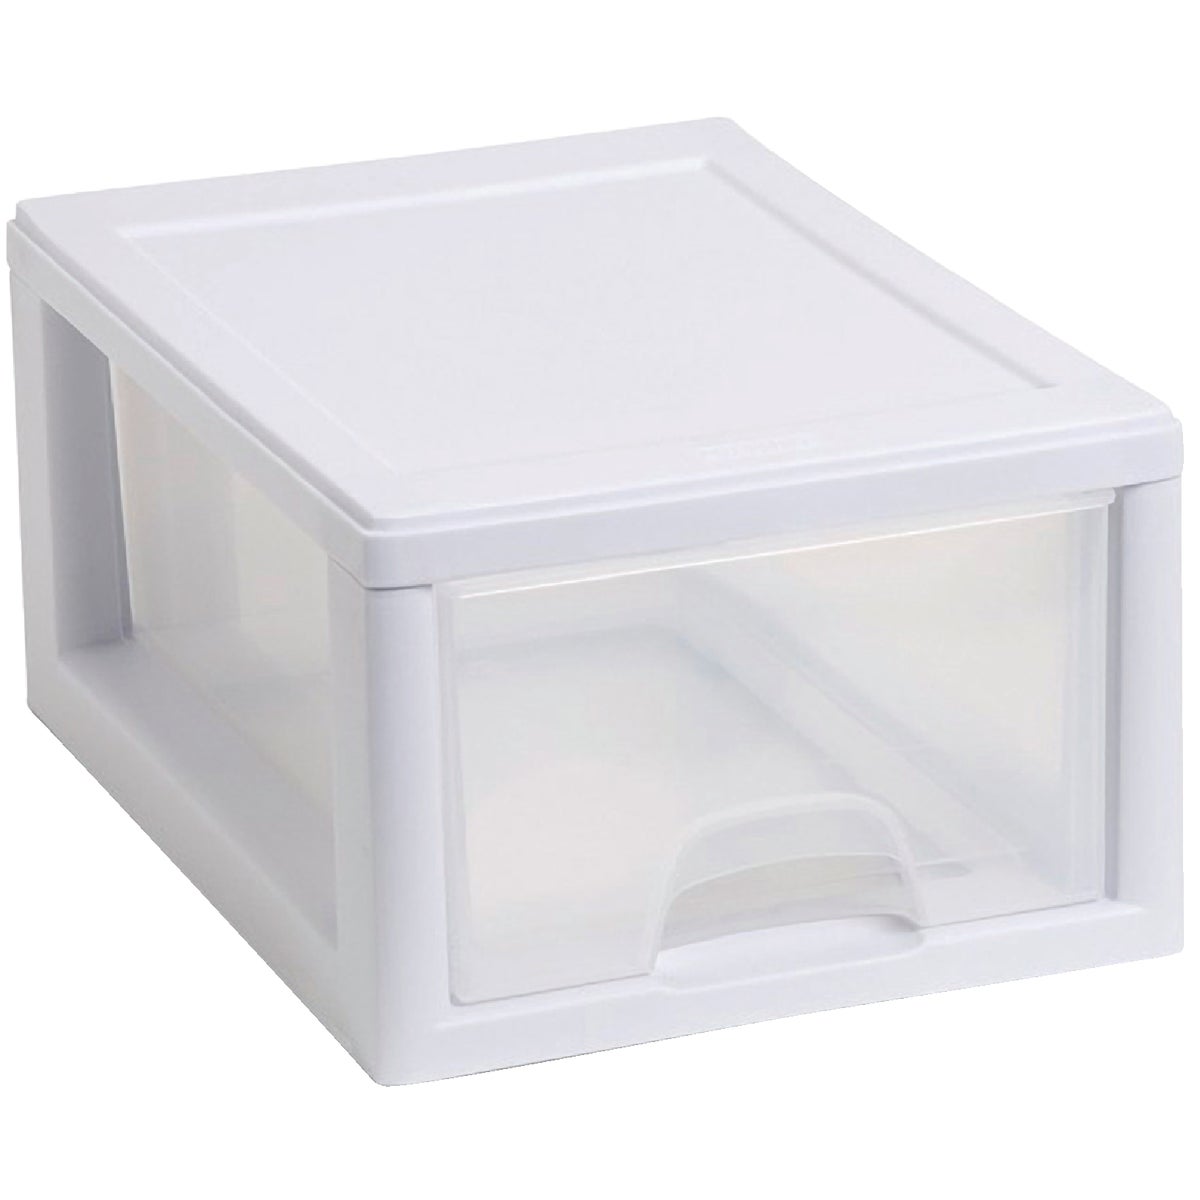 Item 627502, Comfortable handle allows the drawer to pull out easily.